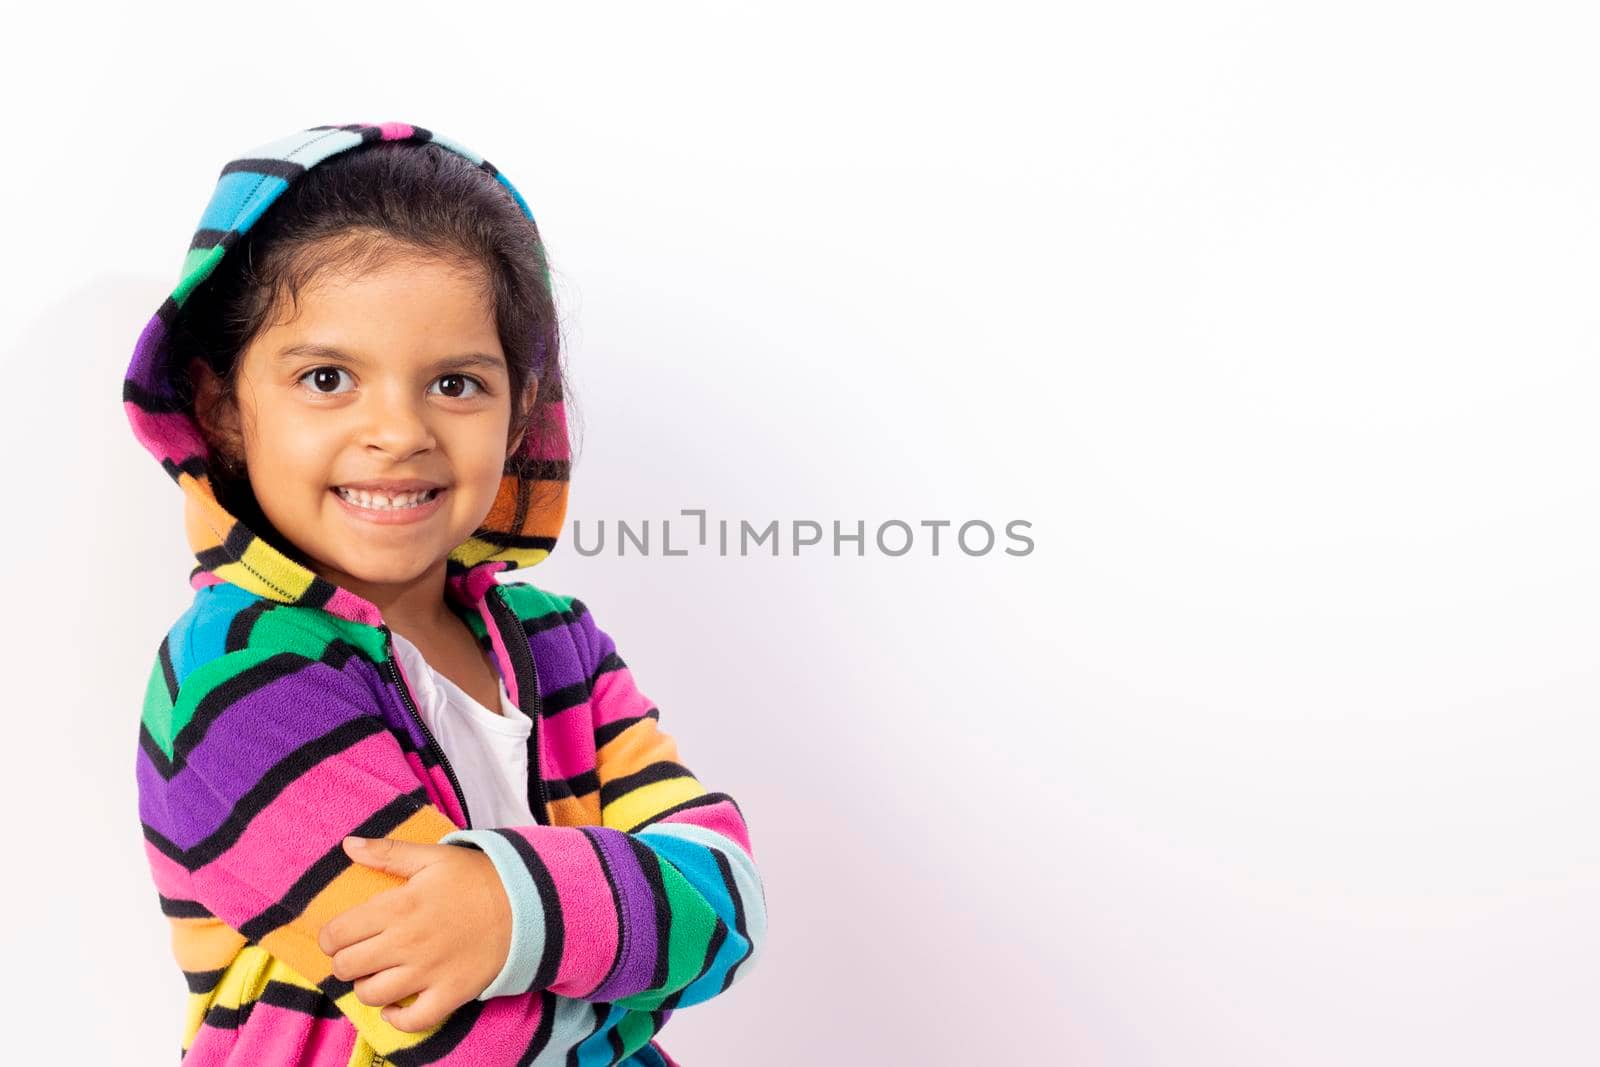 Little girl with cute face with her colorful sweater, with a white background